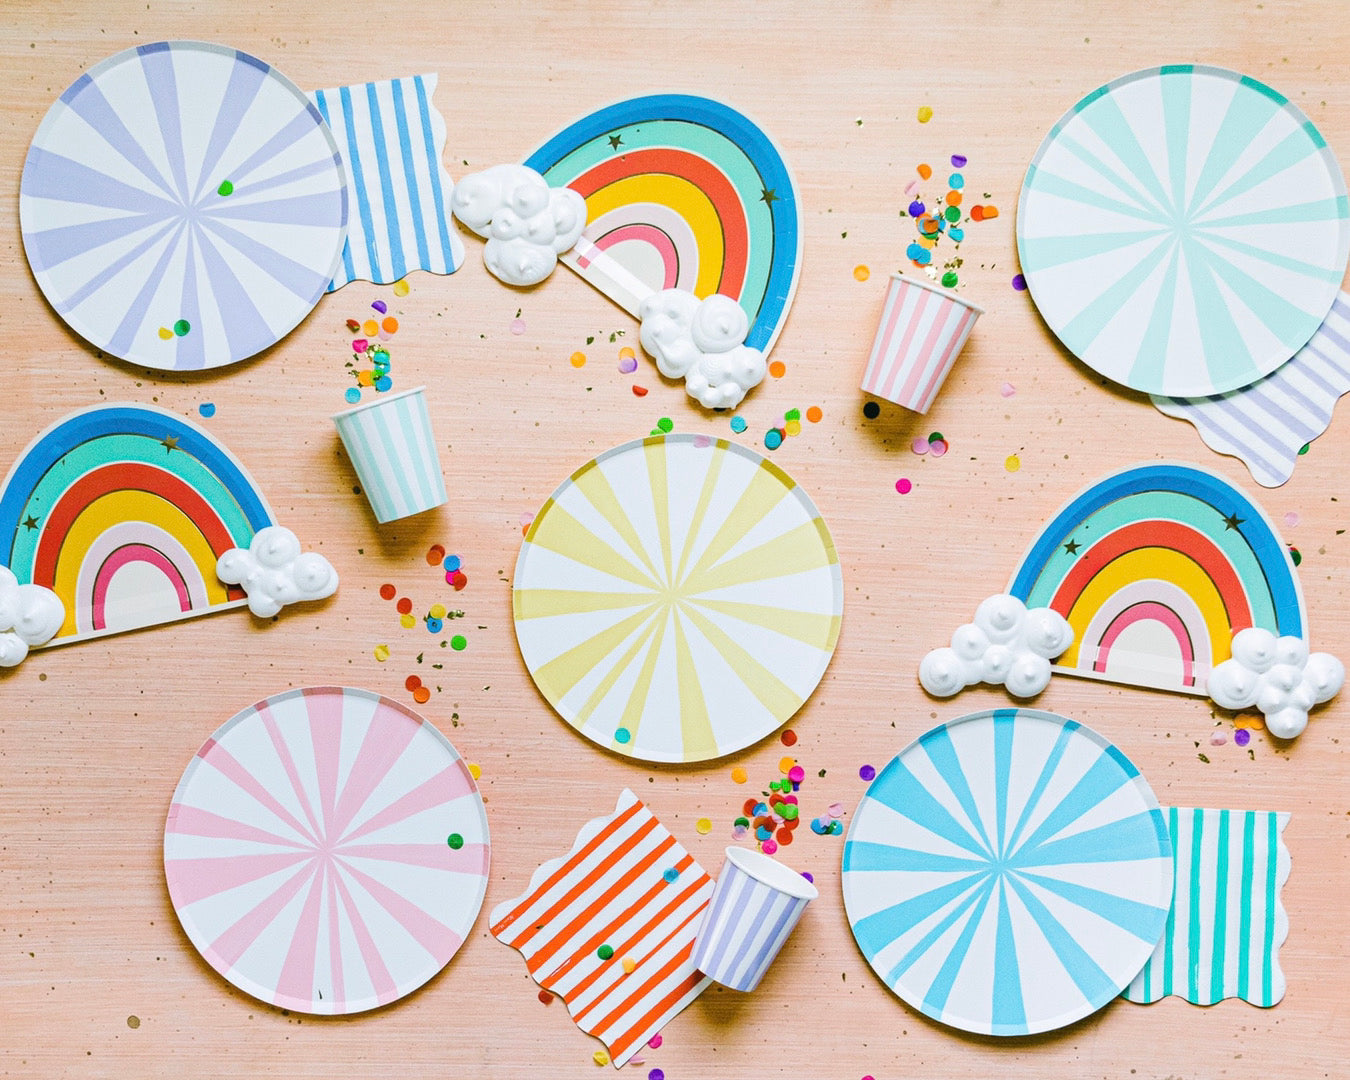 Rainbow stripe party supplies and rainbow plates set out for a birthday party.